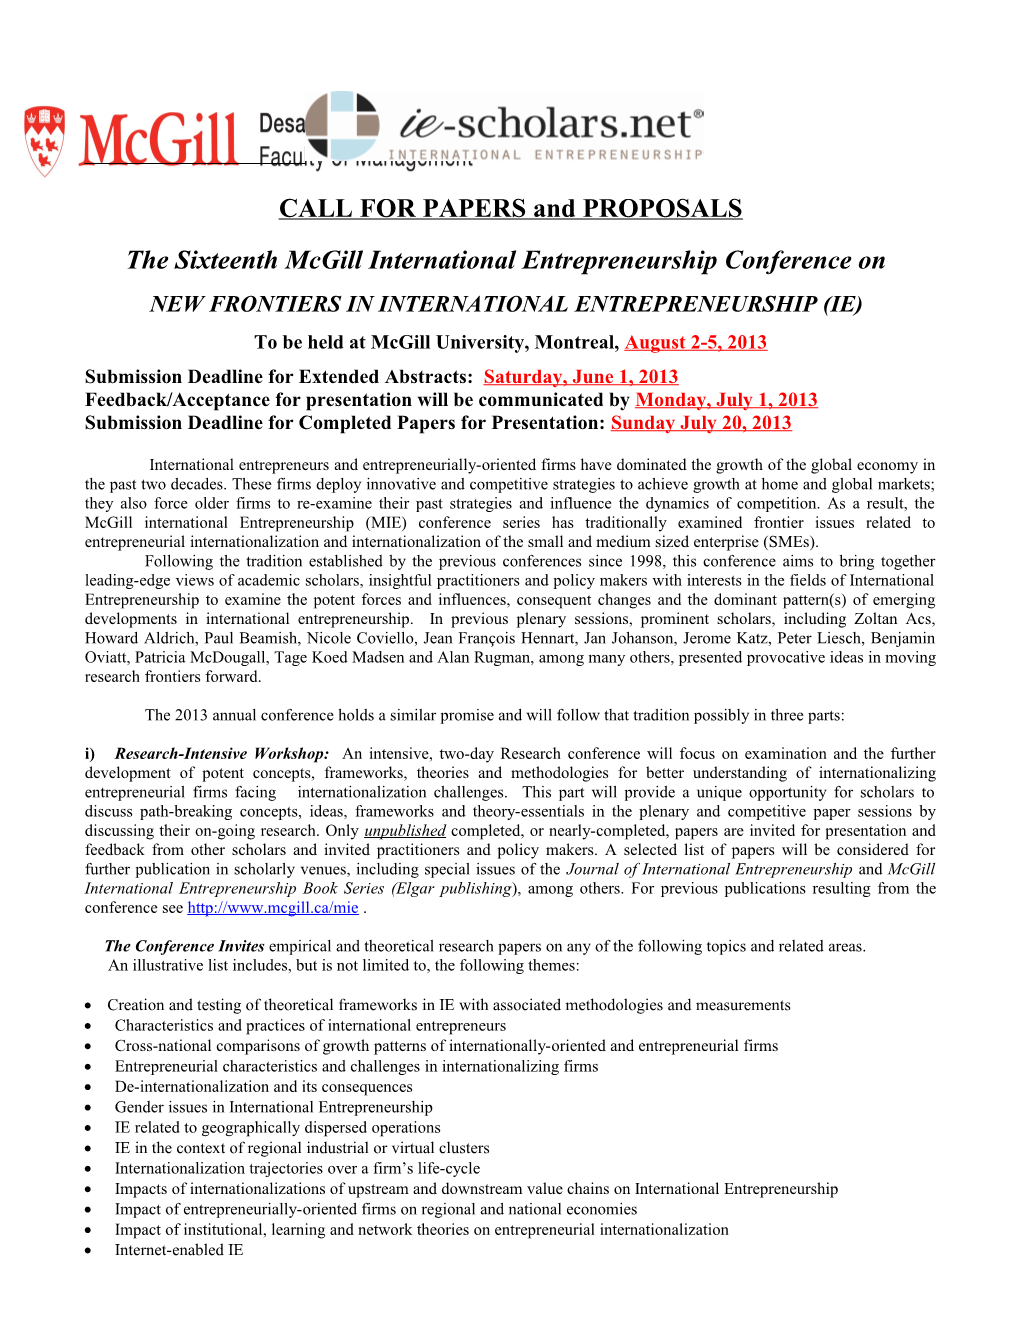 CALL for PAPERS and PROPOSALS